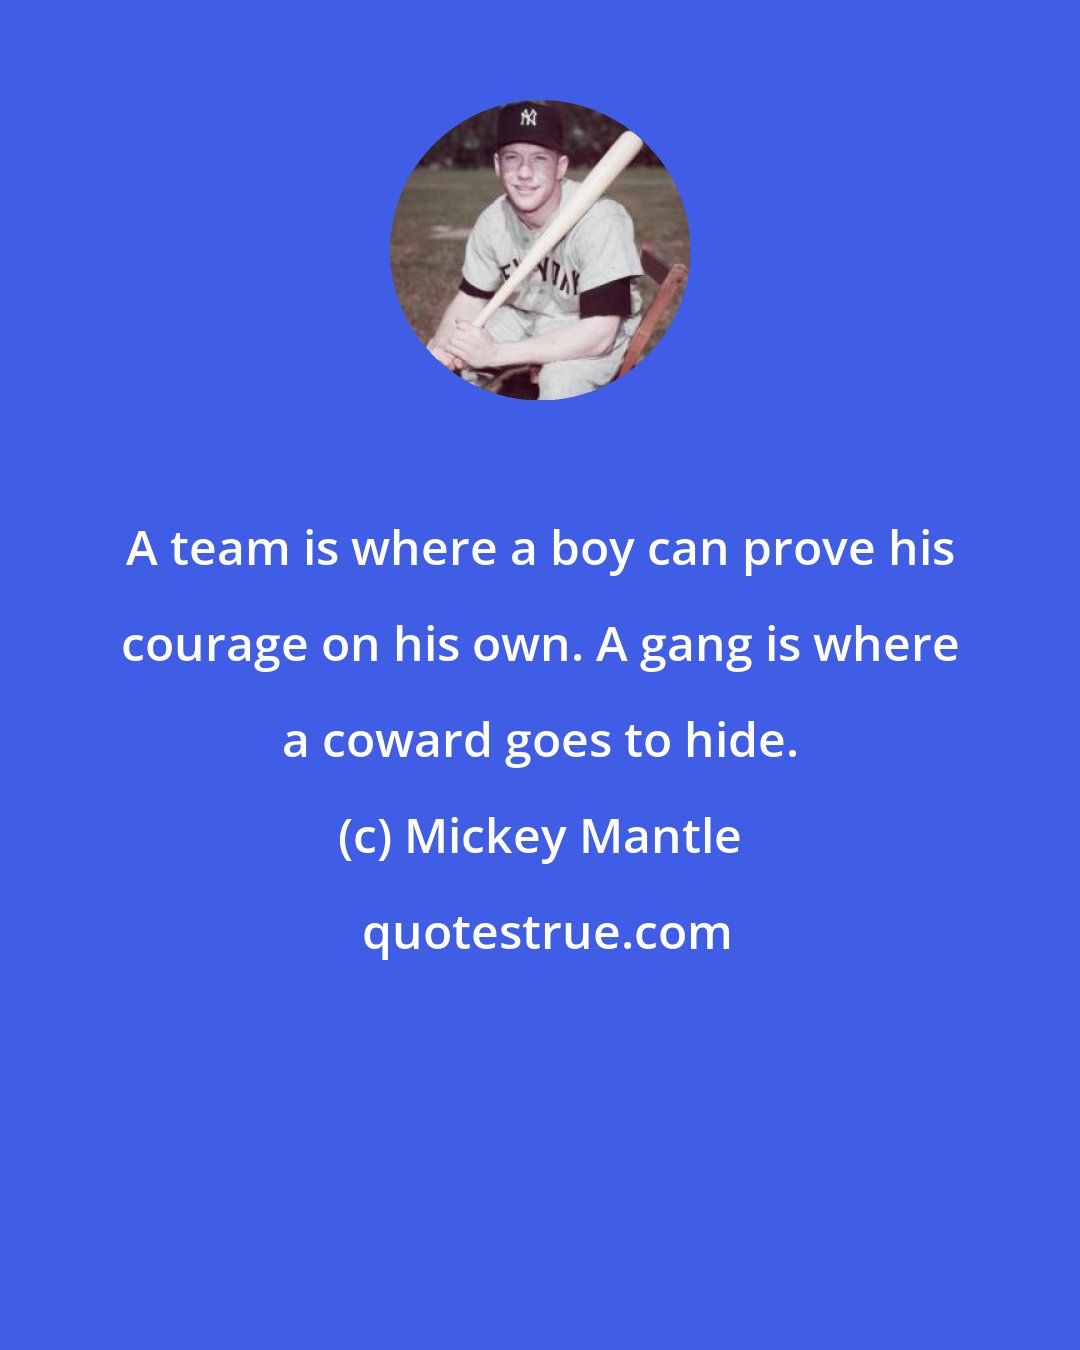 Mickey Mantle: A team is where a boy can prove his courage on his own. A gang is where a coward goes to hide.